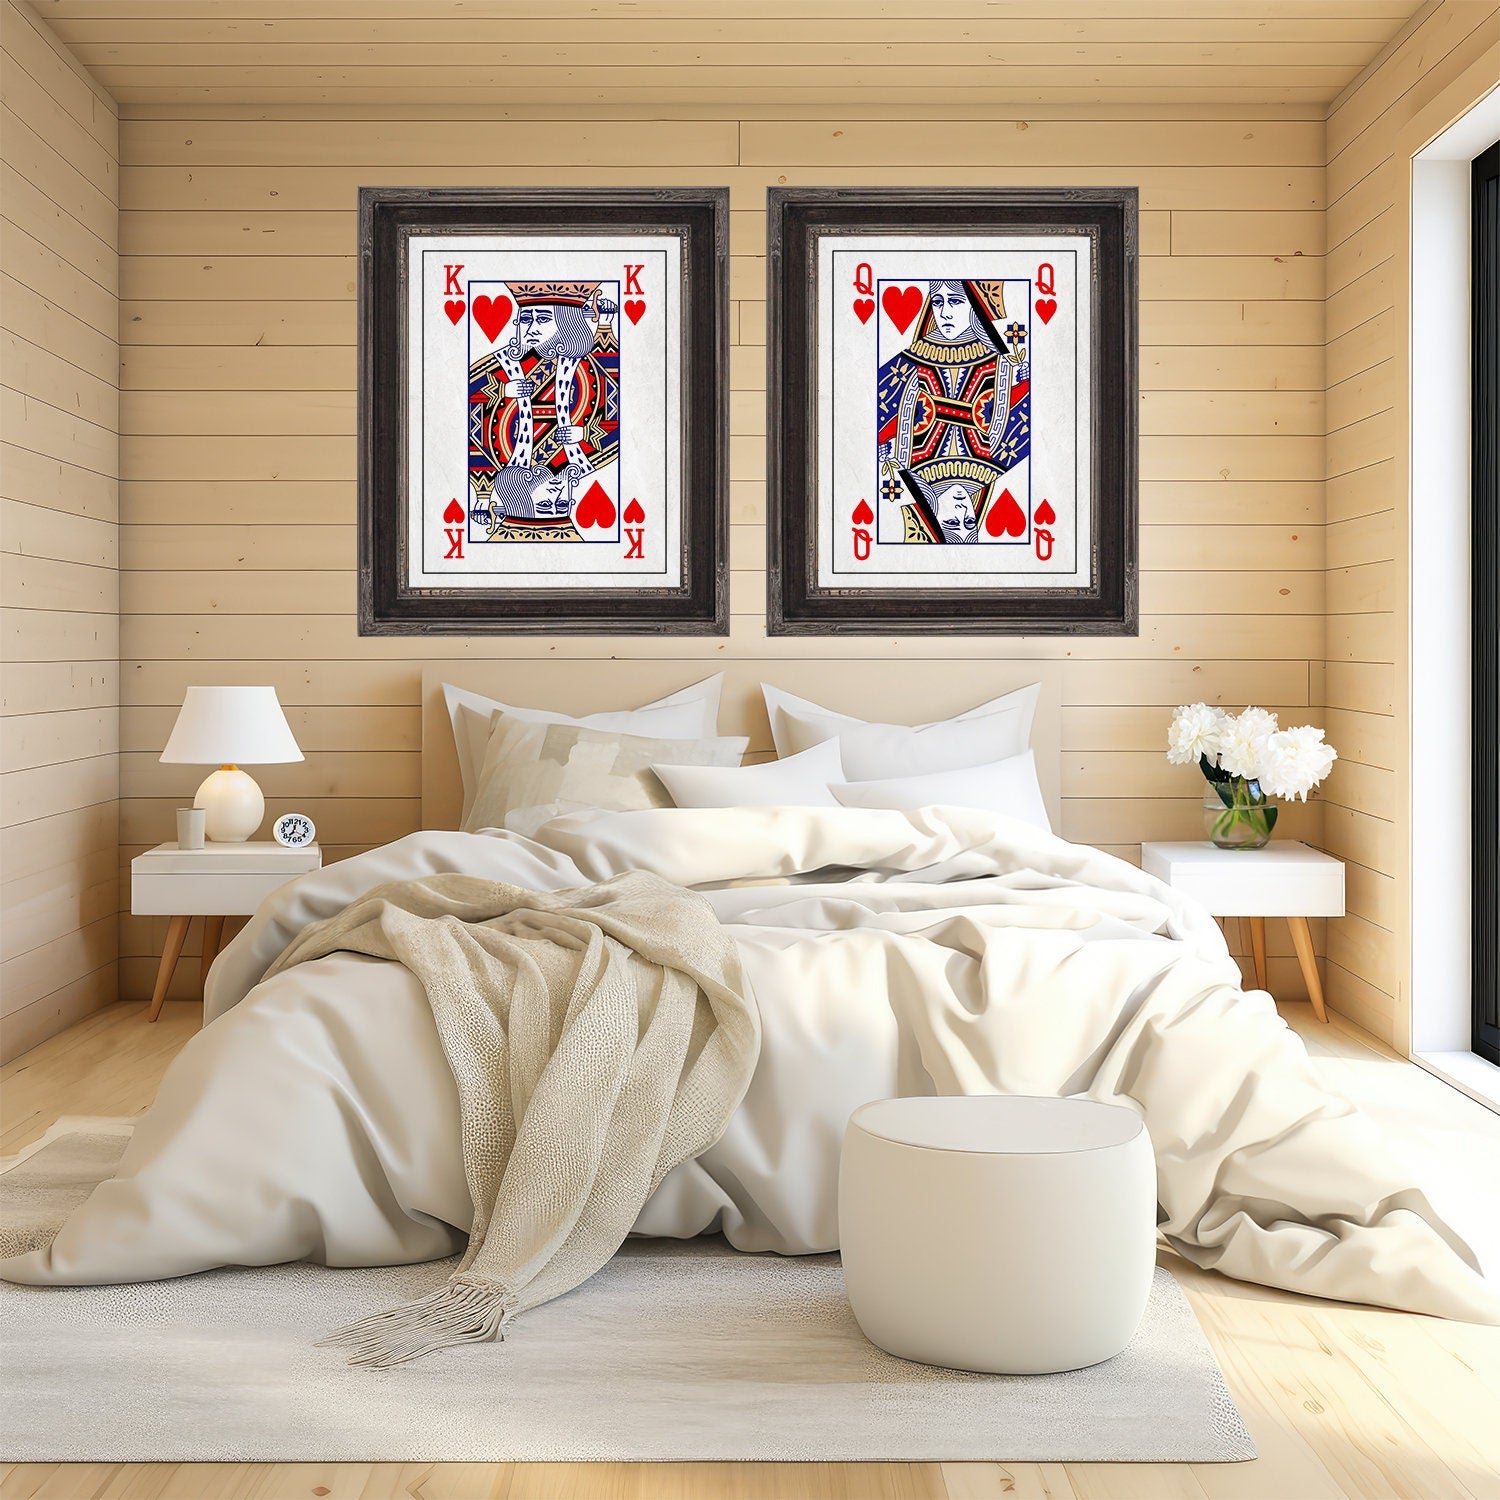 King and Queen of Hearts Playing Card Fine Art Prints - Poker Card Posters at Adirondack Retro